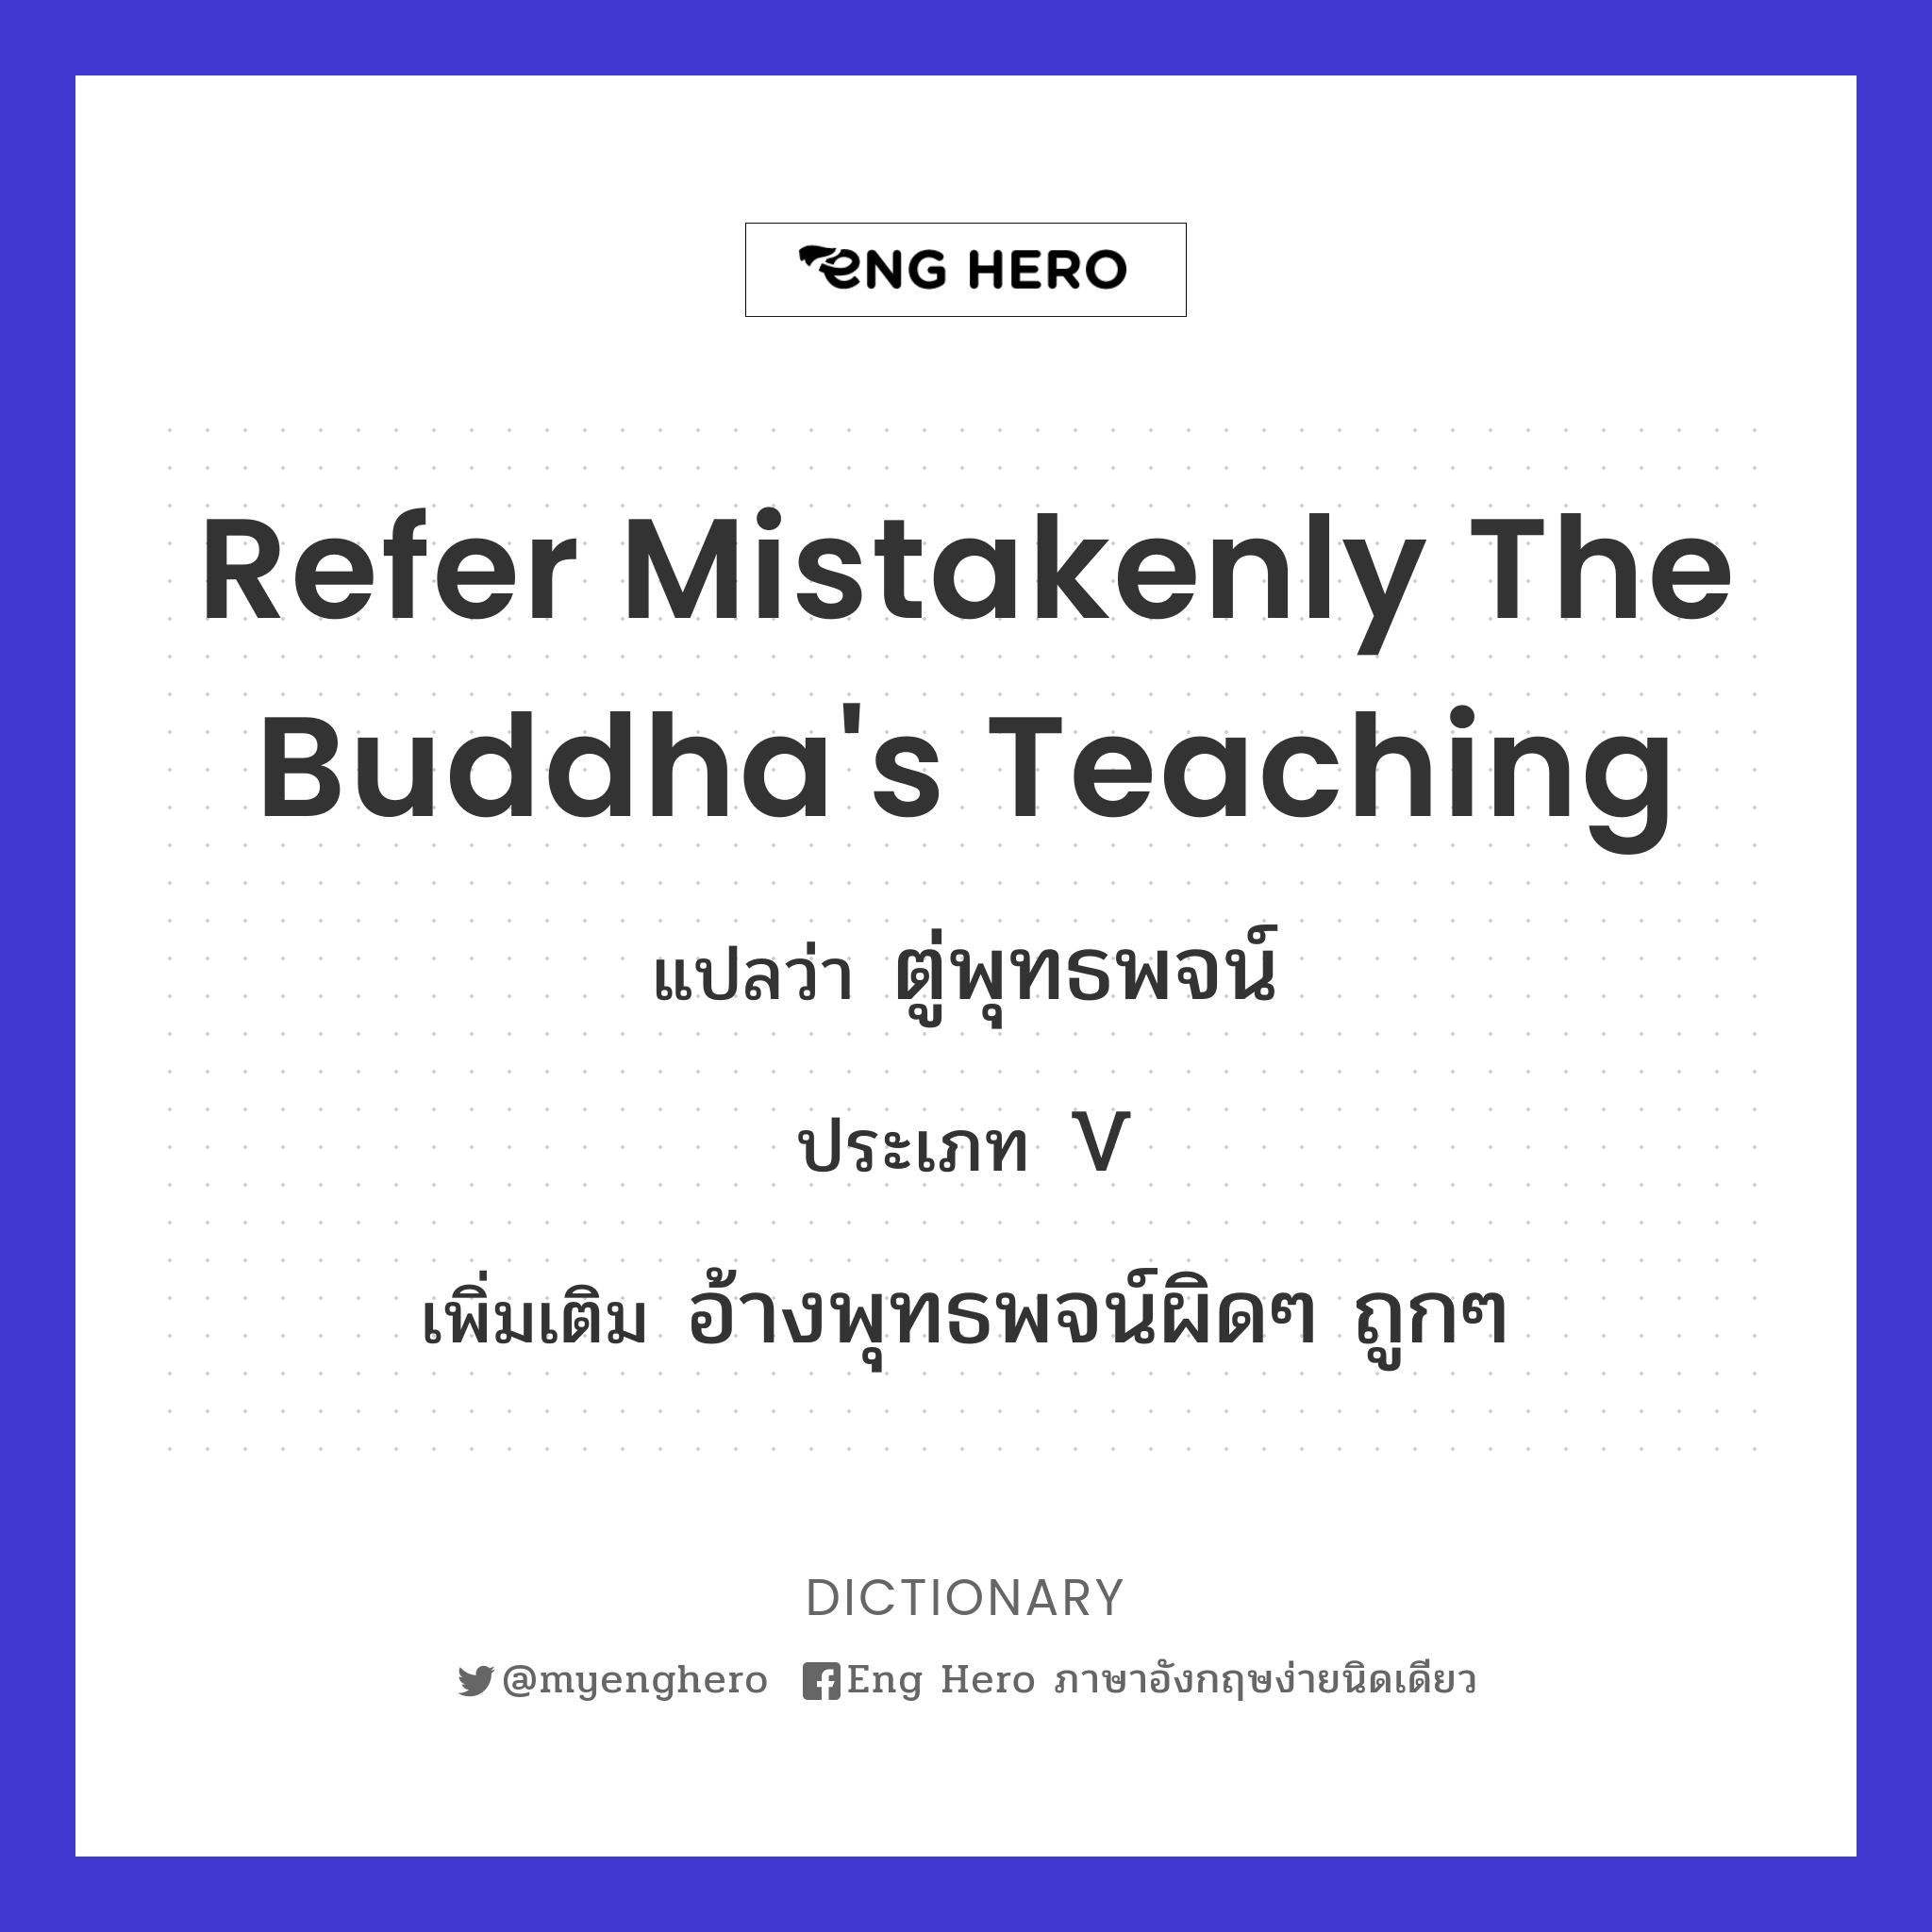 refer mistakenly the Buddha's teaching